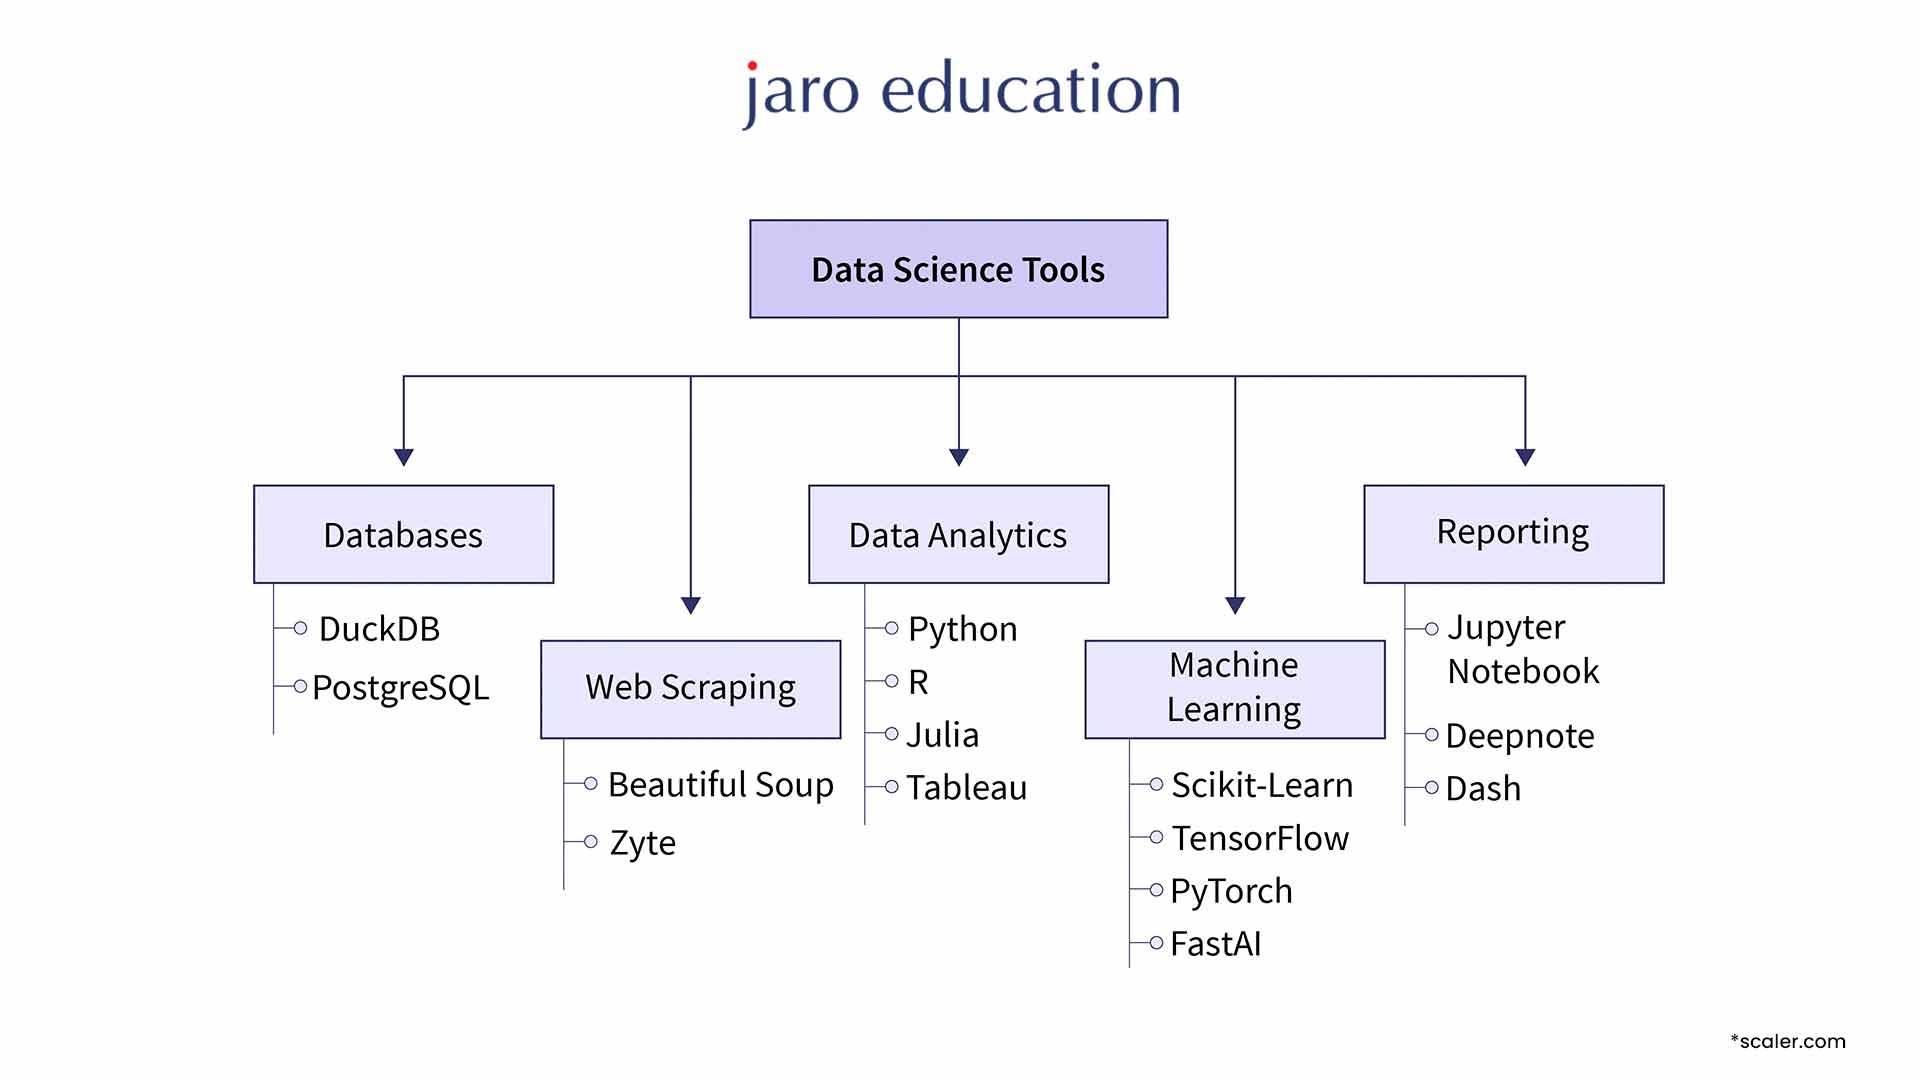 Data Science Tools - Categories